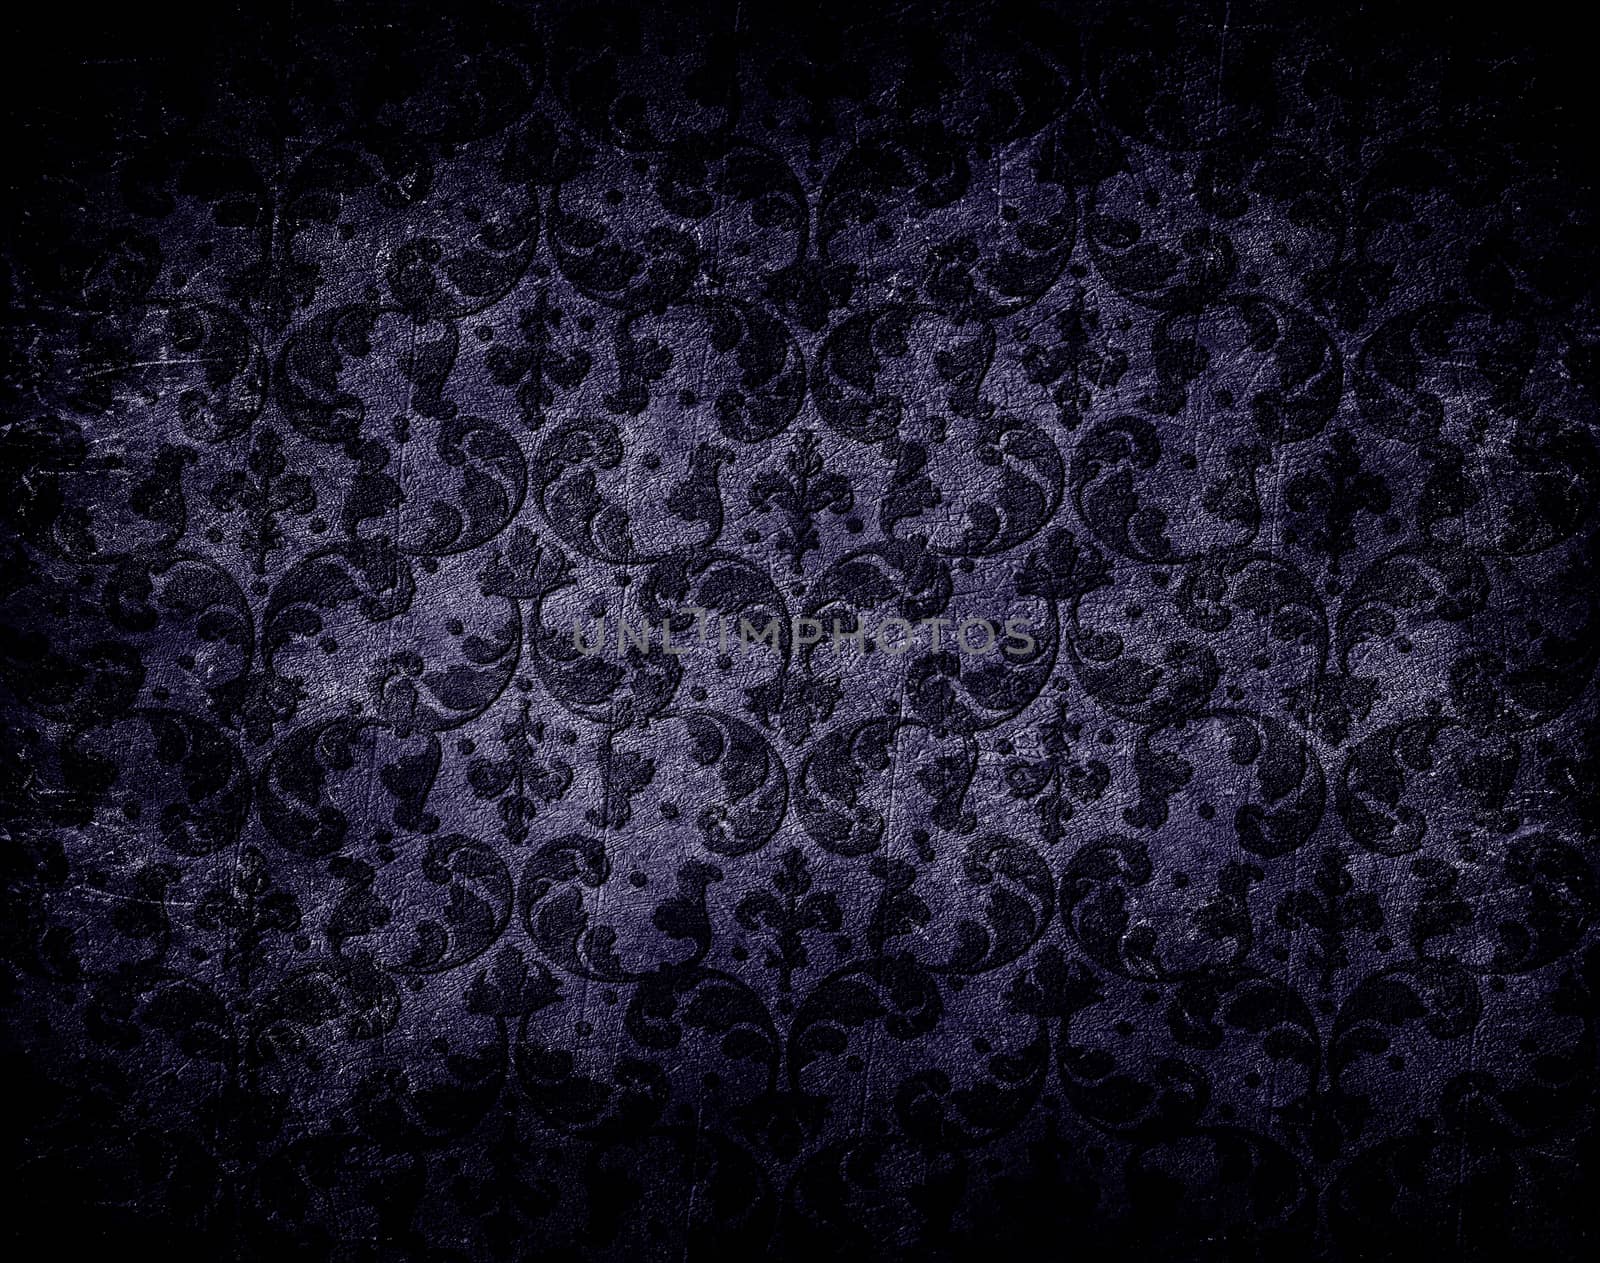 abstract stone background with floral pattern